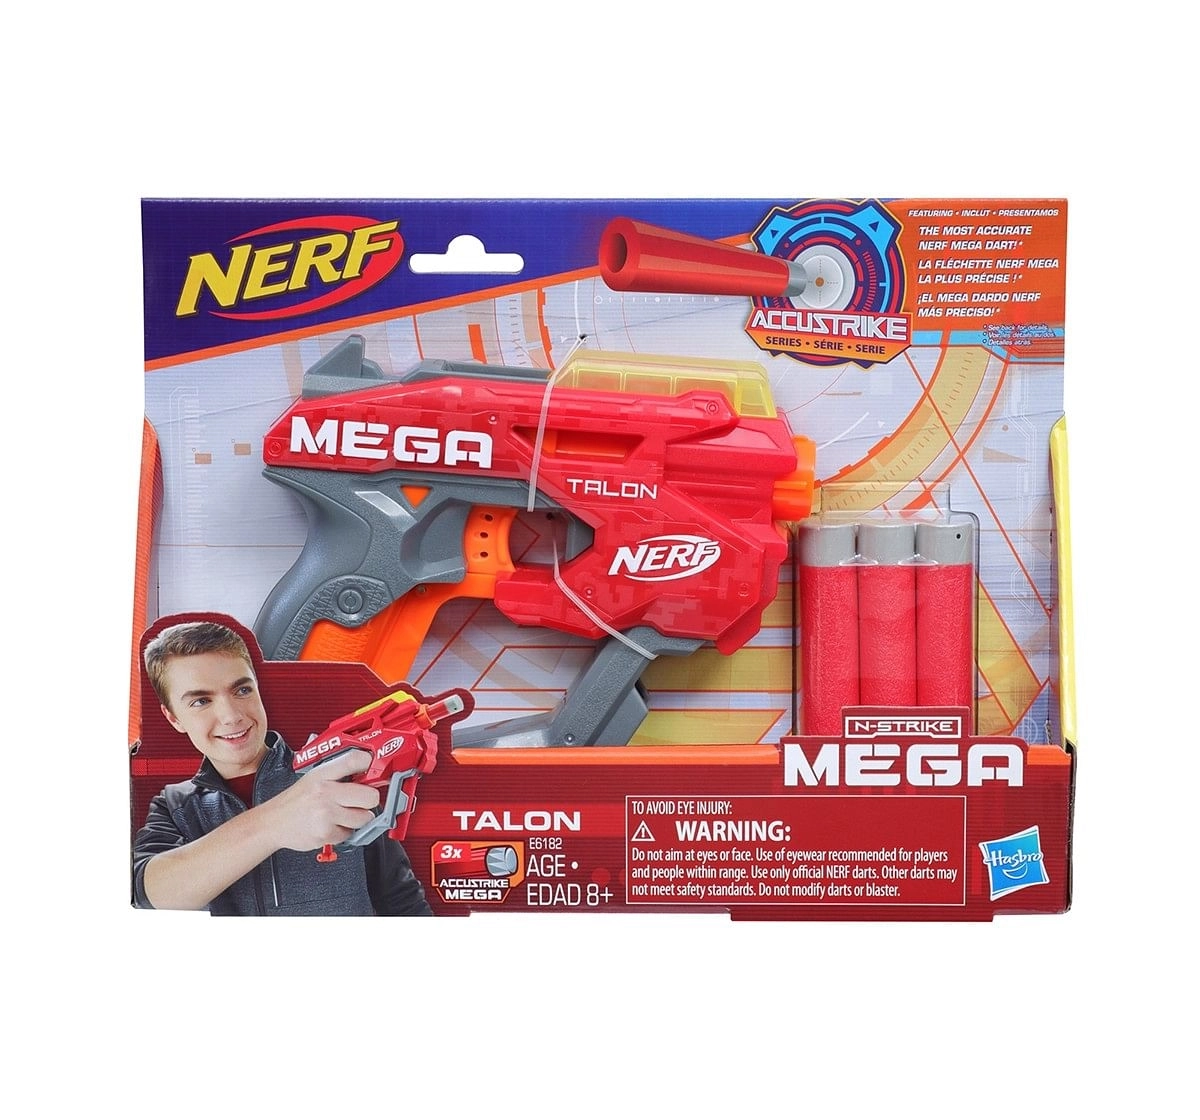 Nerf Mega Talon Blaster -- Includes 3 Official AccuStrike Nerf Mega Darts -- For Kids, Teens, Adults Blasters for age 8Y+ 